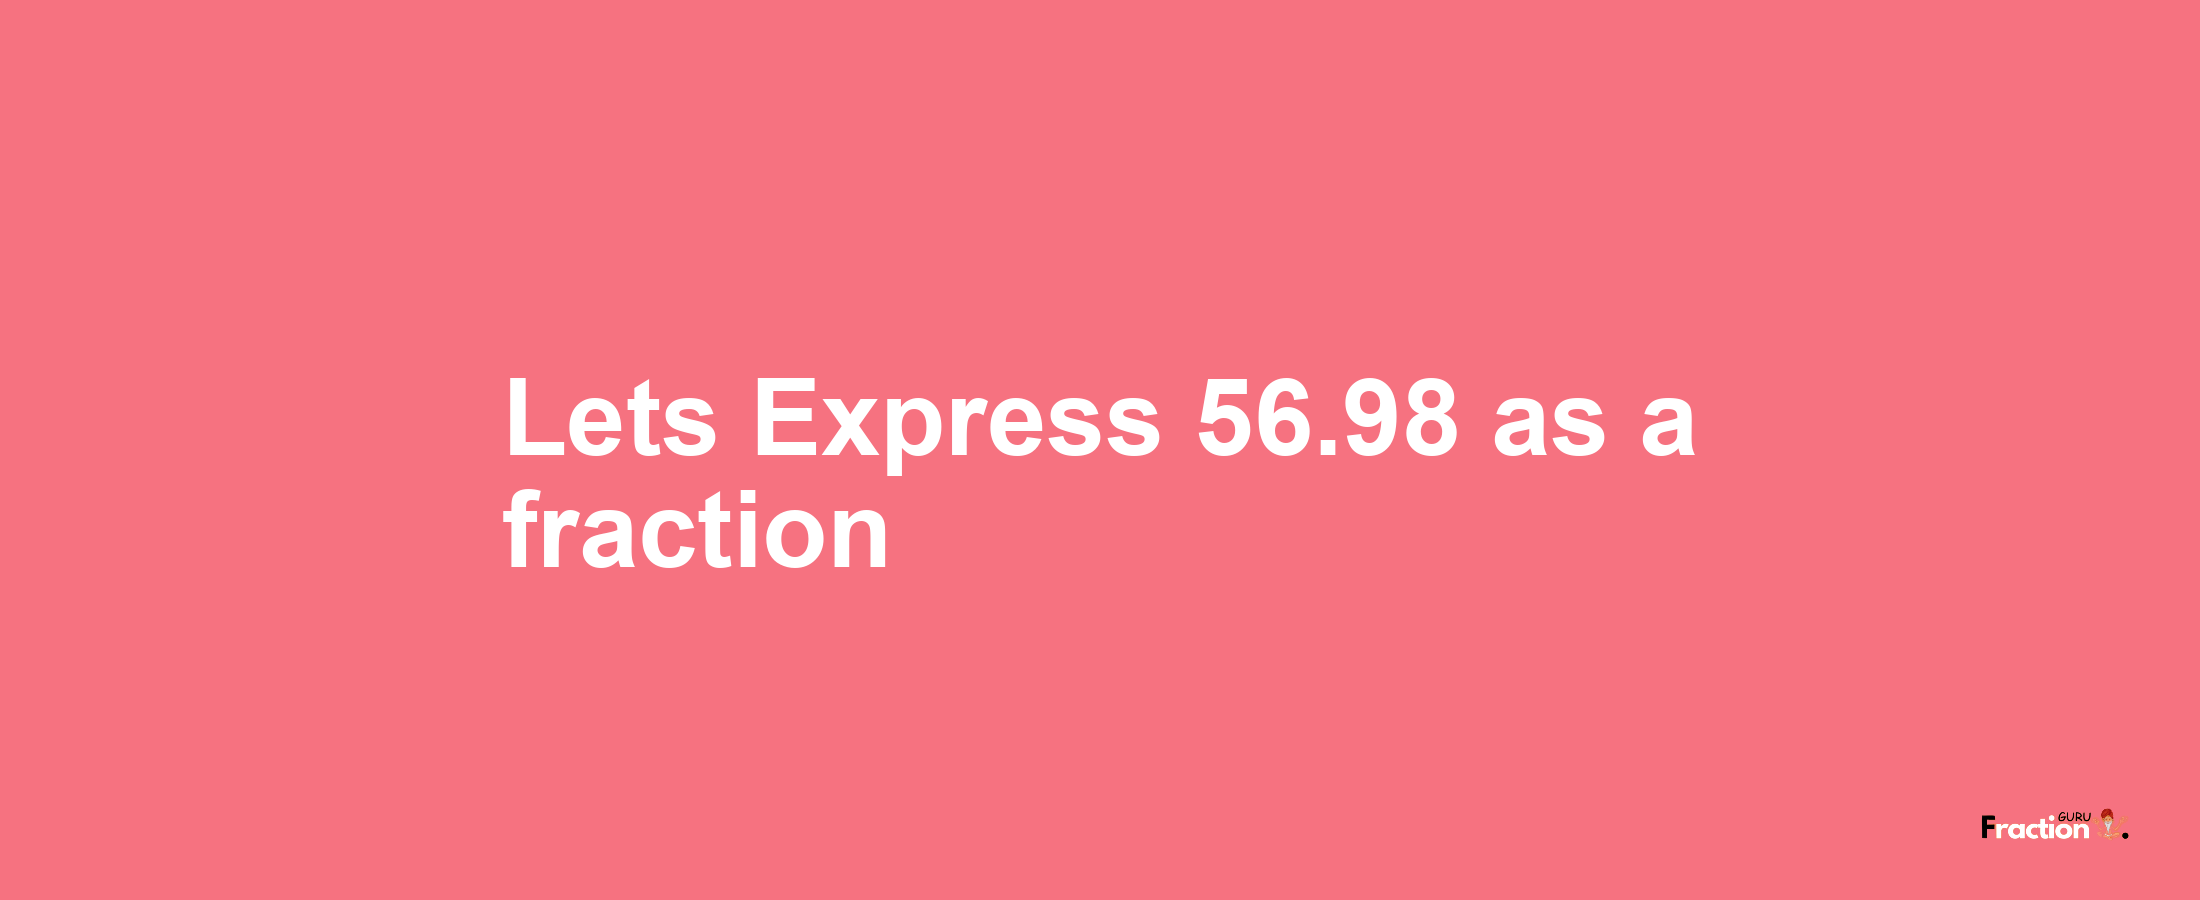 Lets Express 56.98 as afraction